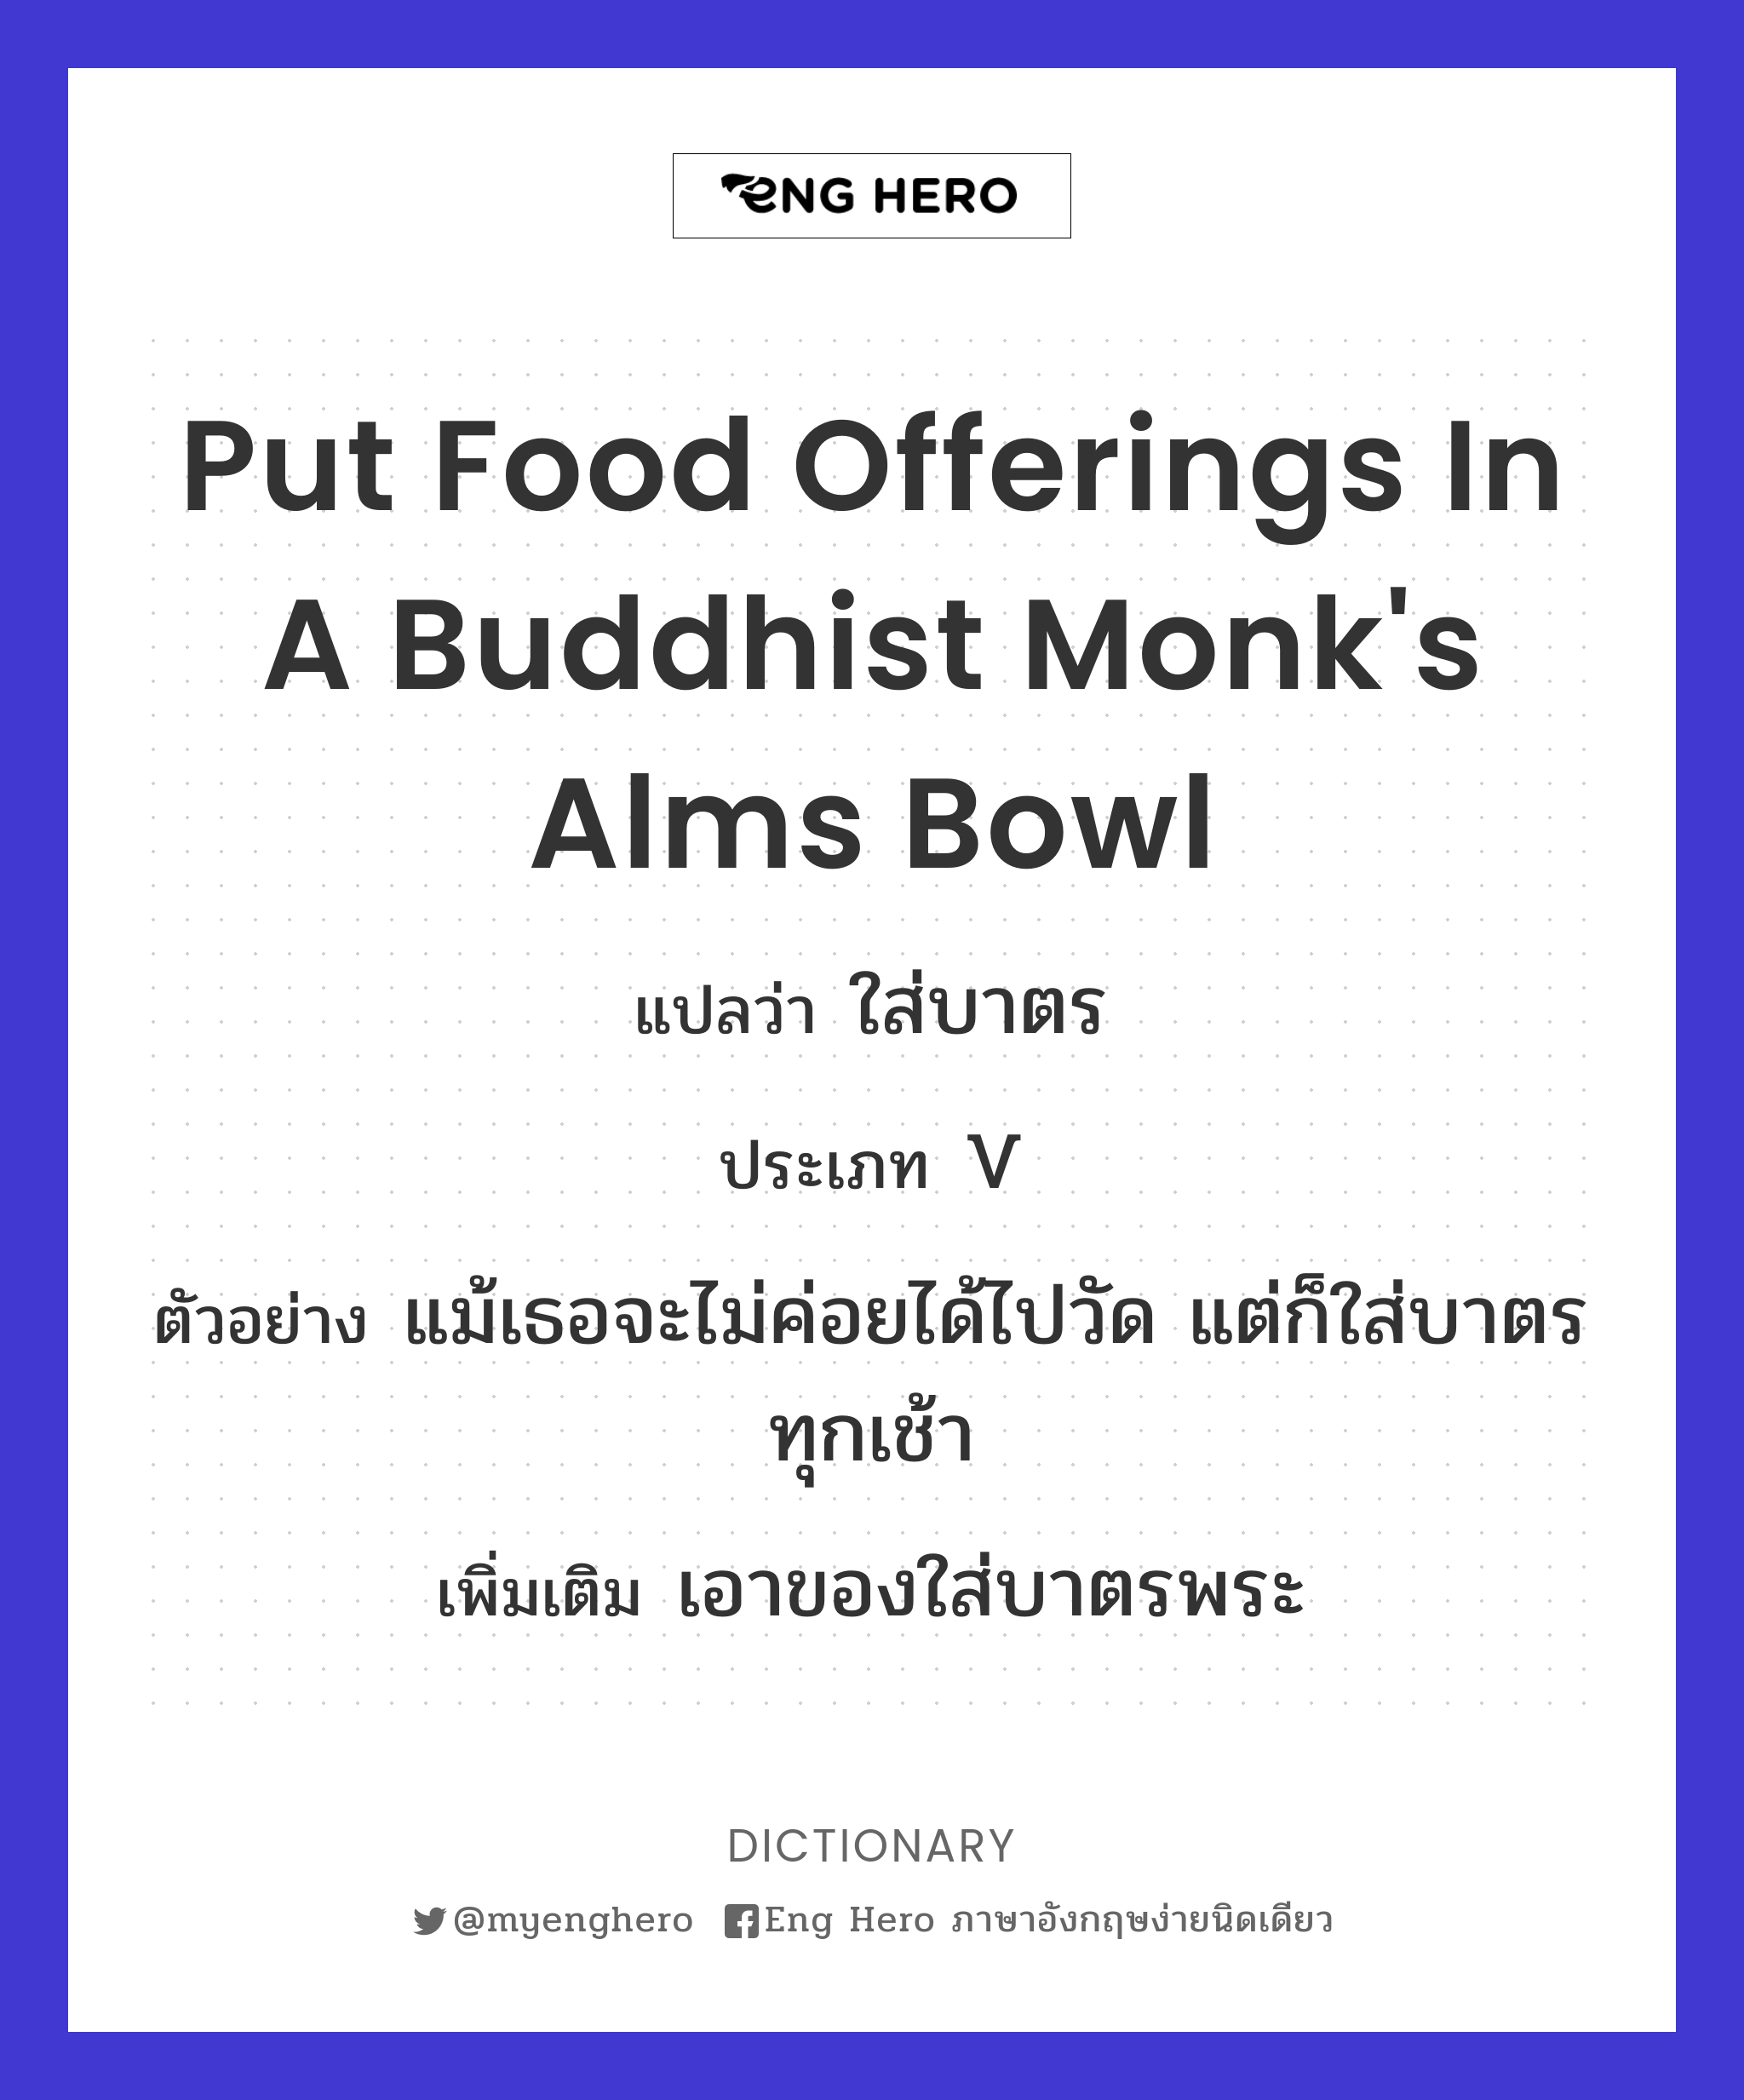 put food offerings in a Buddhist monk's alms bowl